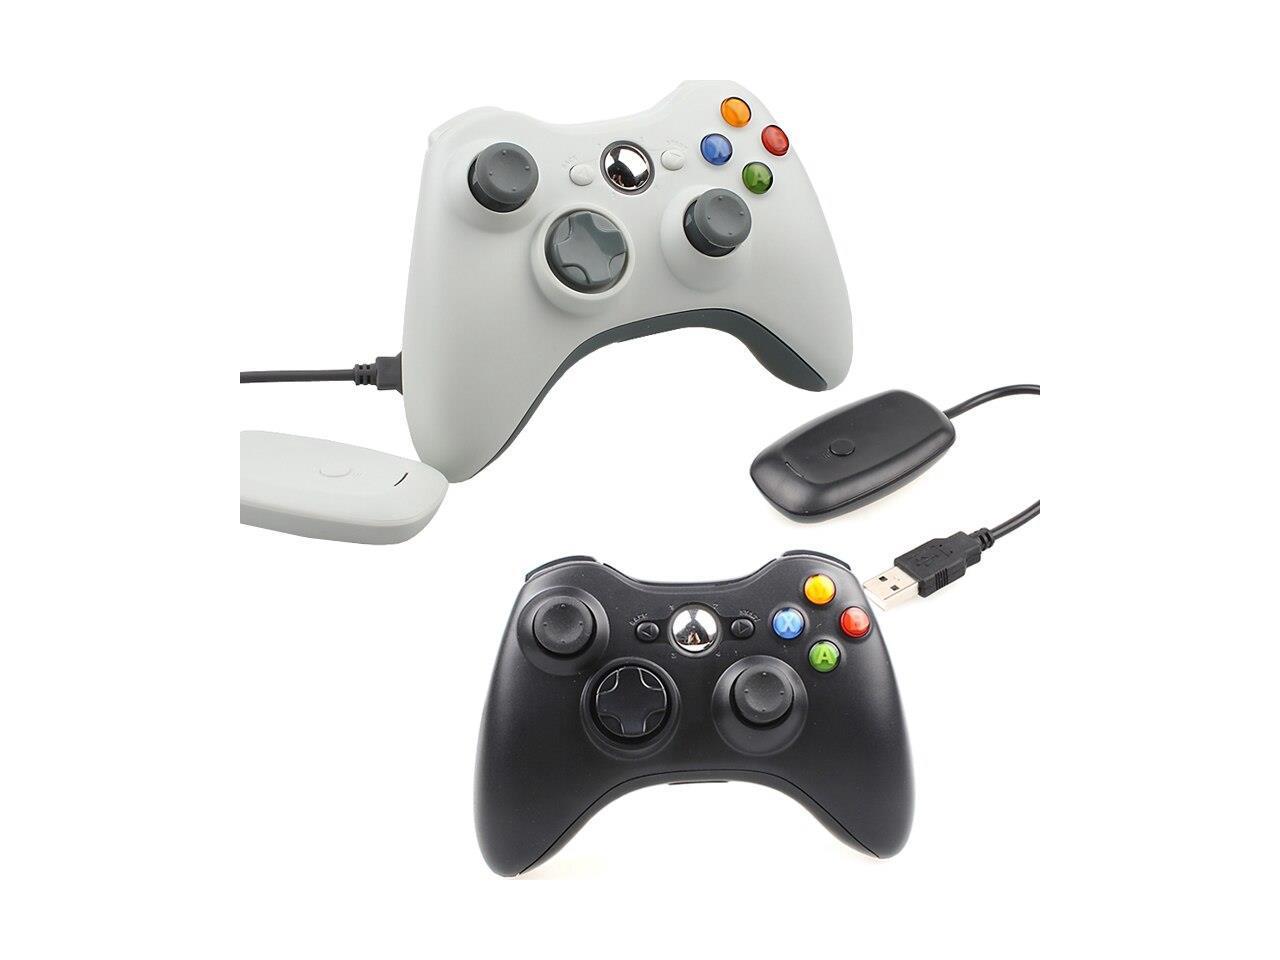 Gamepad For Xbox 360 Wireless Controller For XBOX 360 Controle Wireless Joystick For XBOX 360 Game Controller Gamepad Joypad